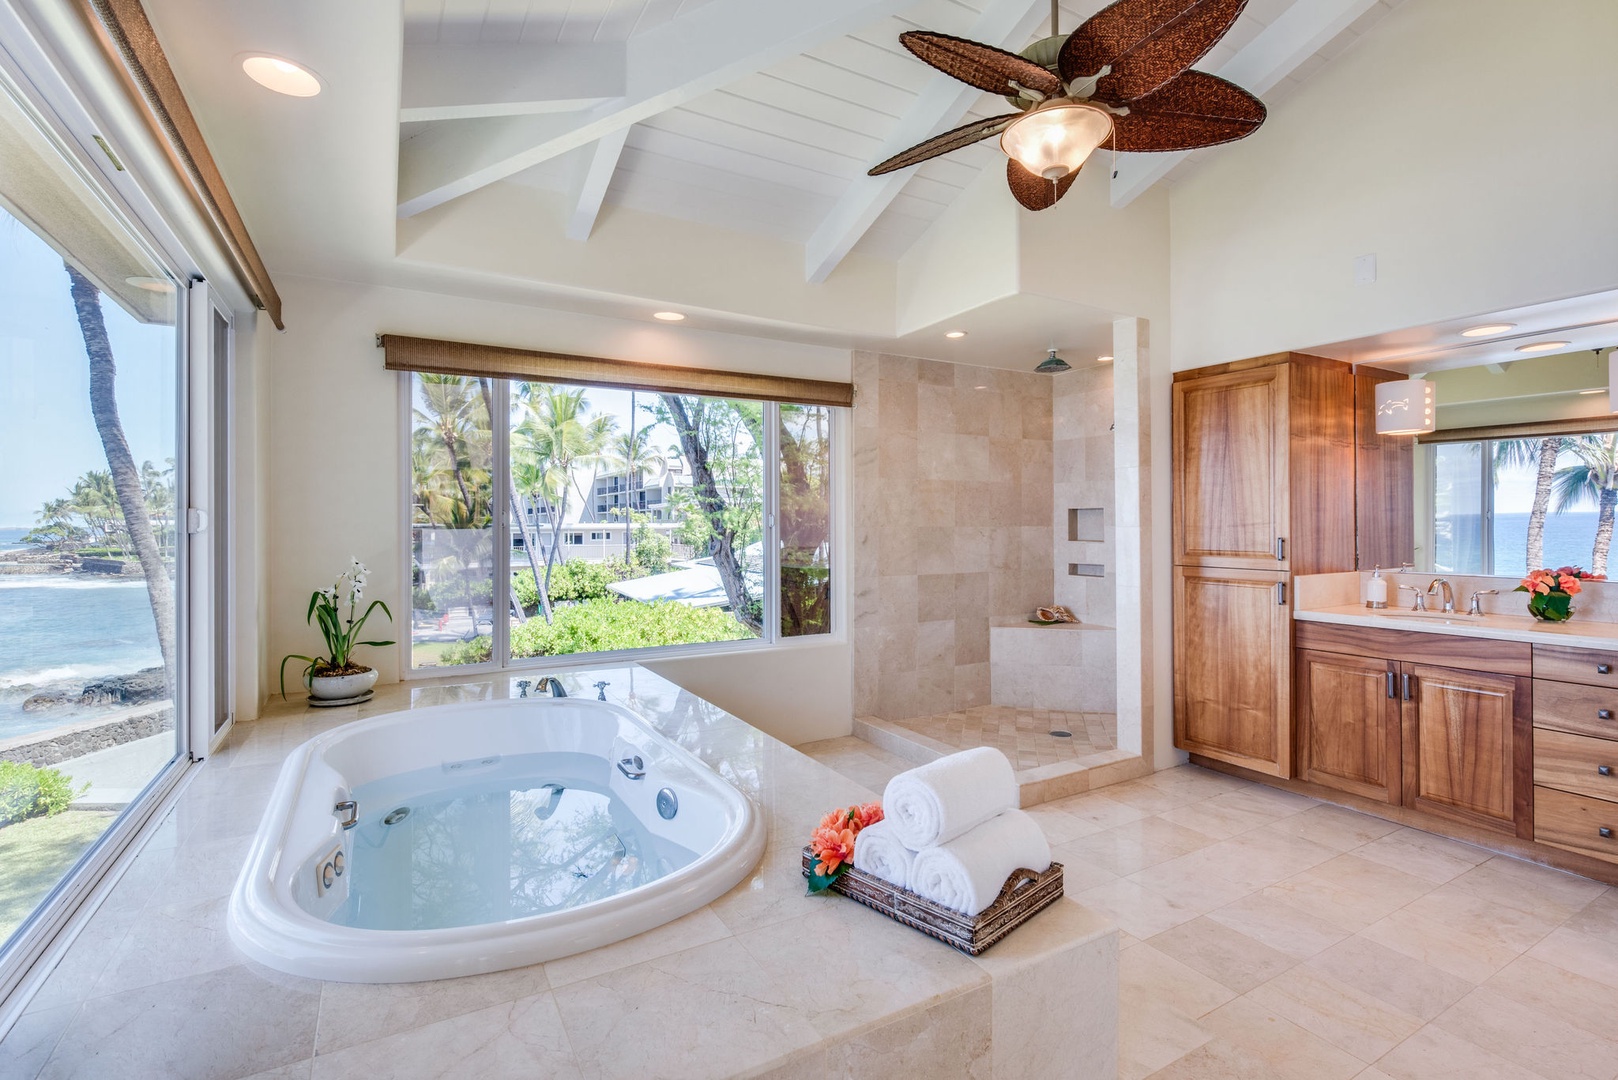 Kailua Kona Vacation Rentals, Kona Beach Bungalows** - Experience tranquility in the spacious spa-like ensuite, featuring a walk-in shower and thoughtful privacy blinds on expansive windows framing ocean vistas